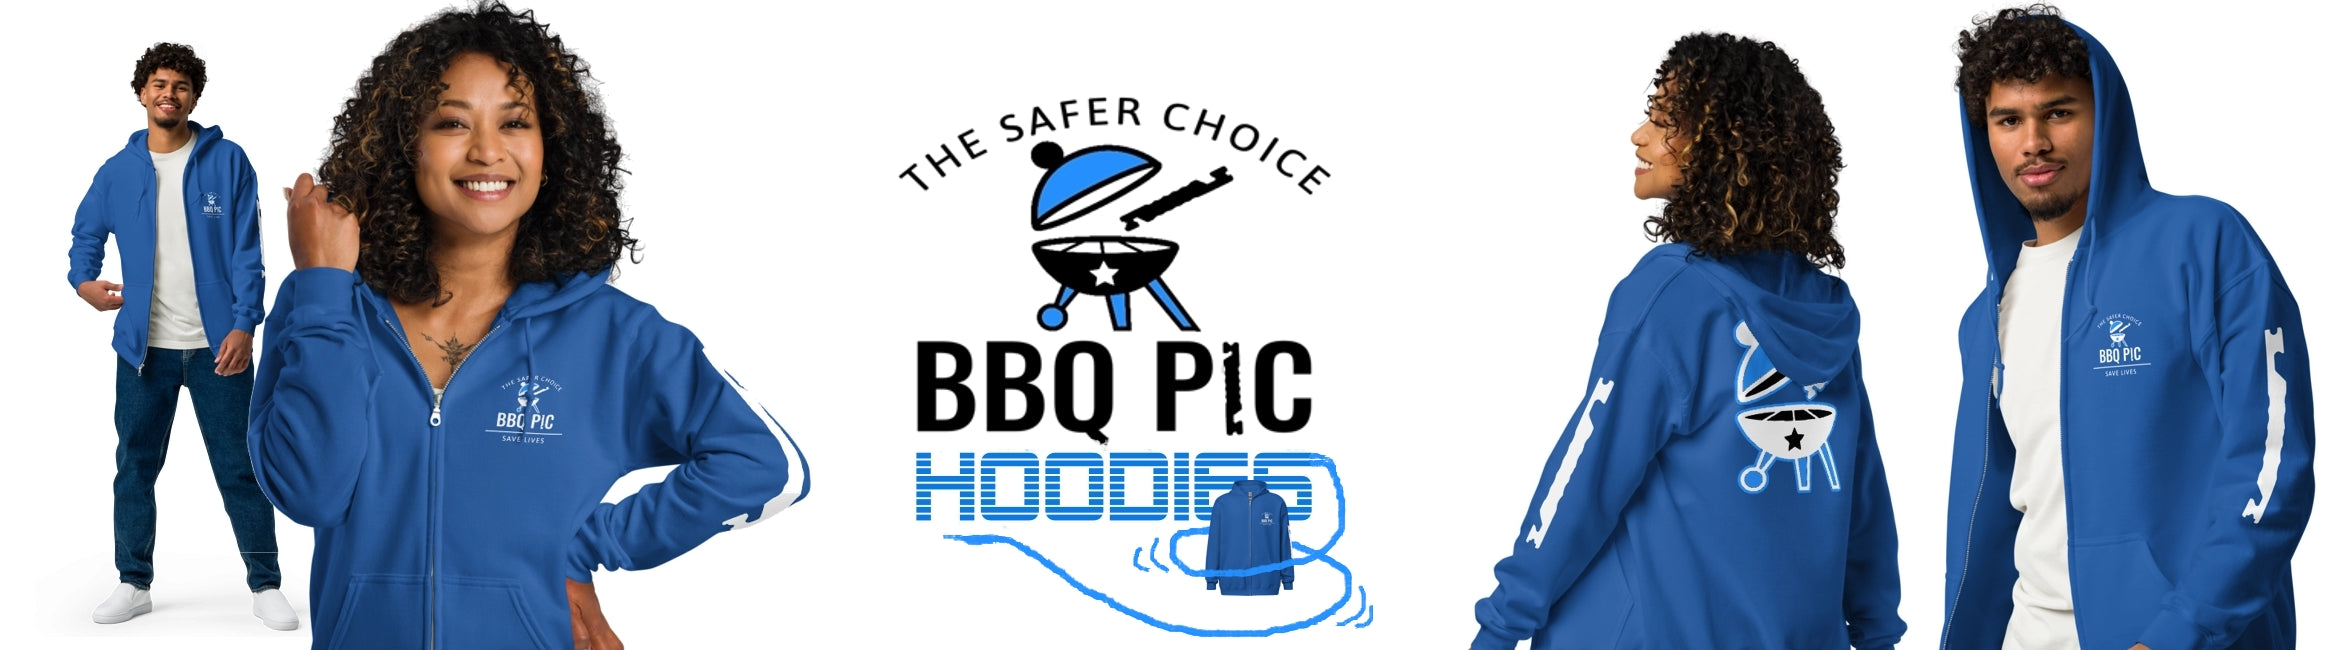 You can buy your own BBQ Pic Hoodie here. Become a BBQ Pic knife after receiving your BBQ Pic - The Excalibur of BBQ Scrapers for barbecue cleaning.